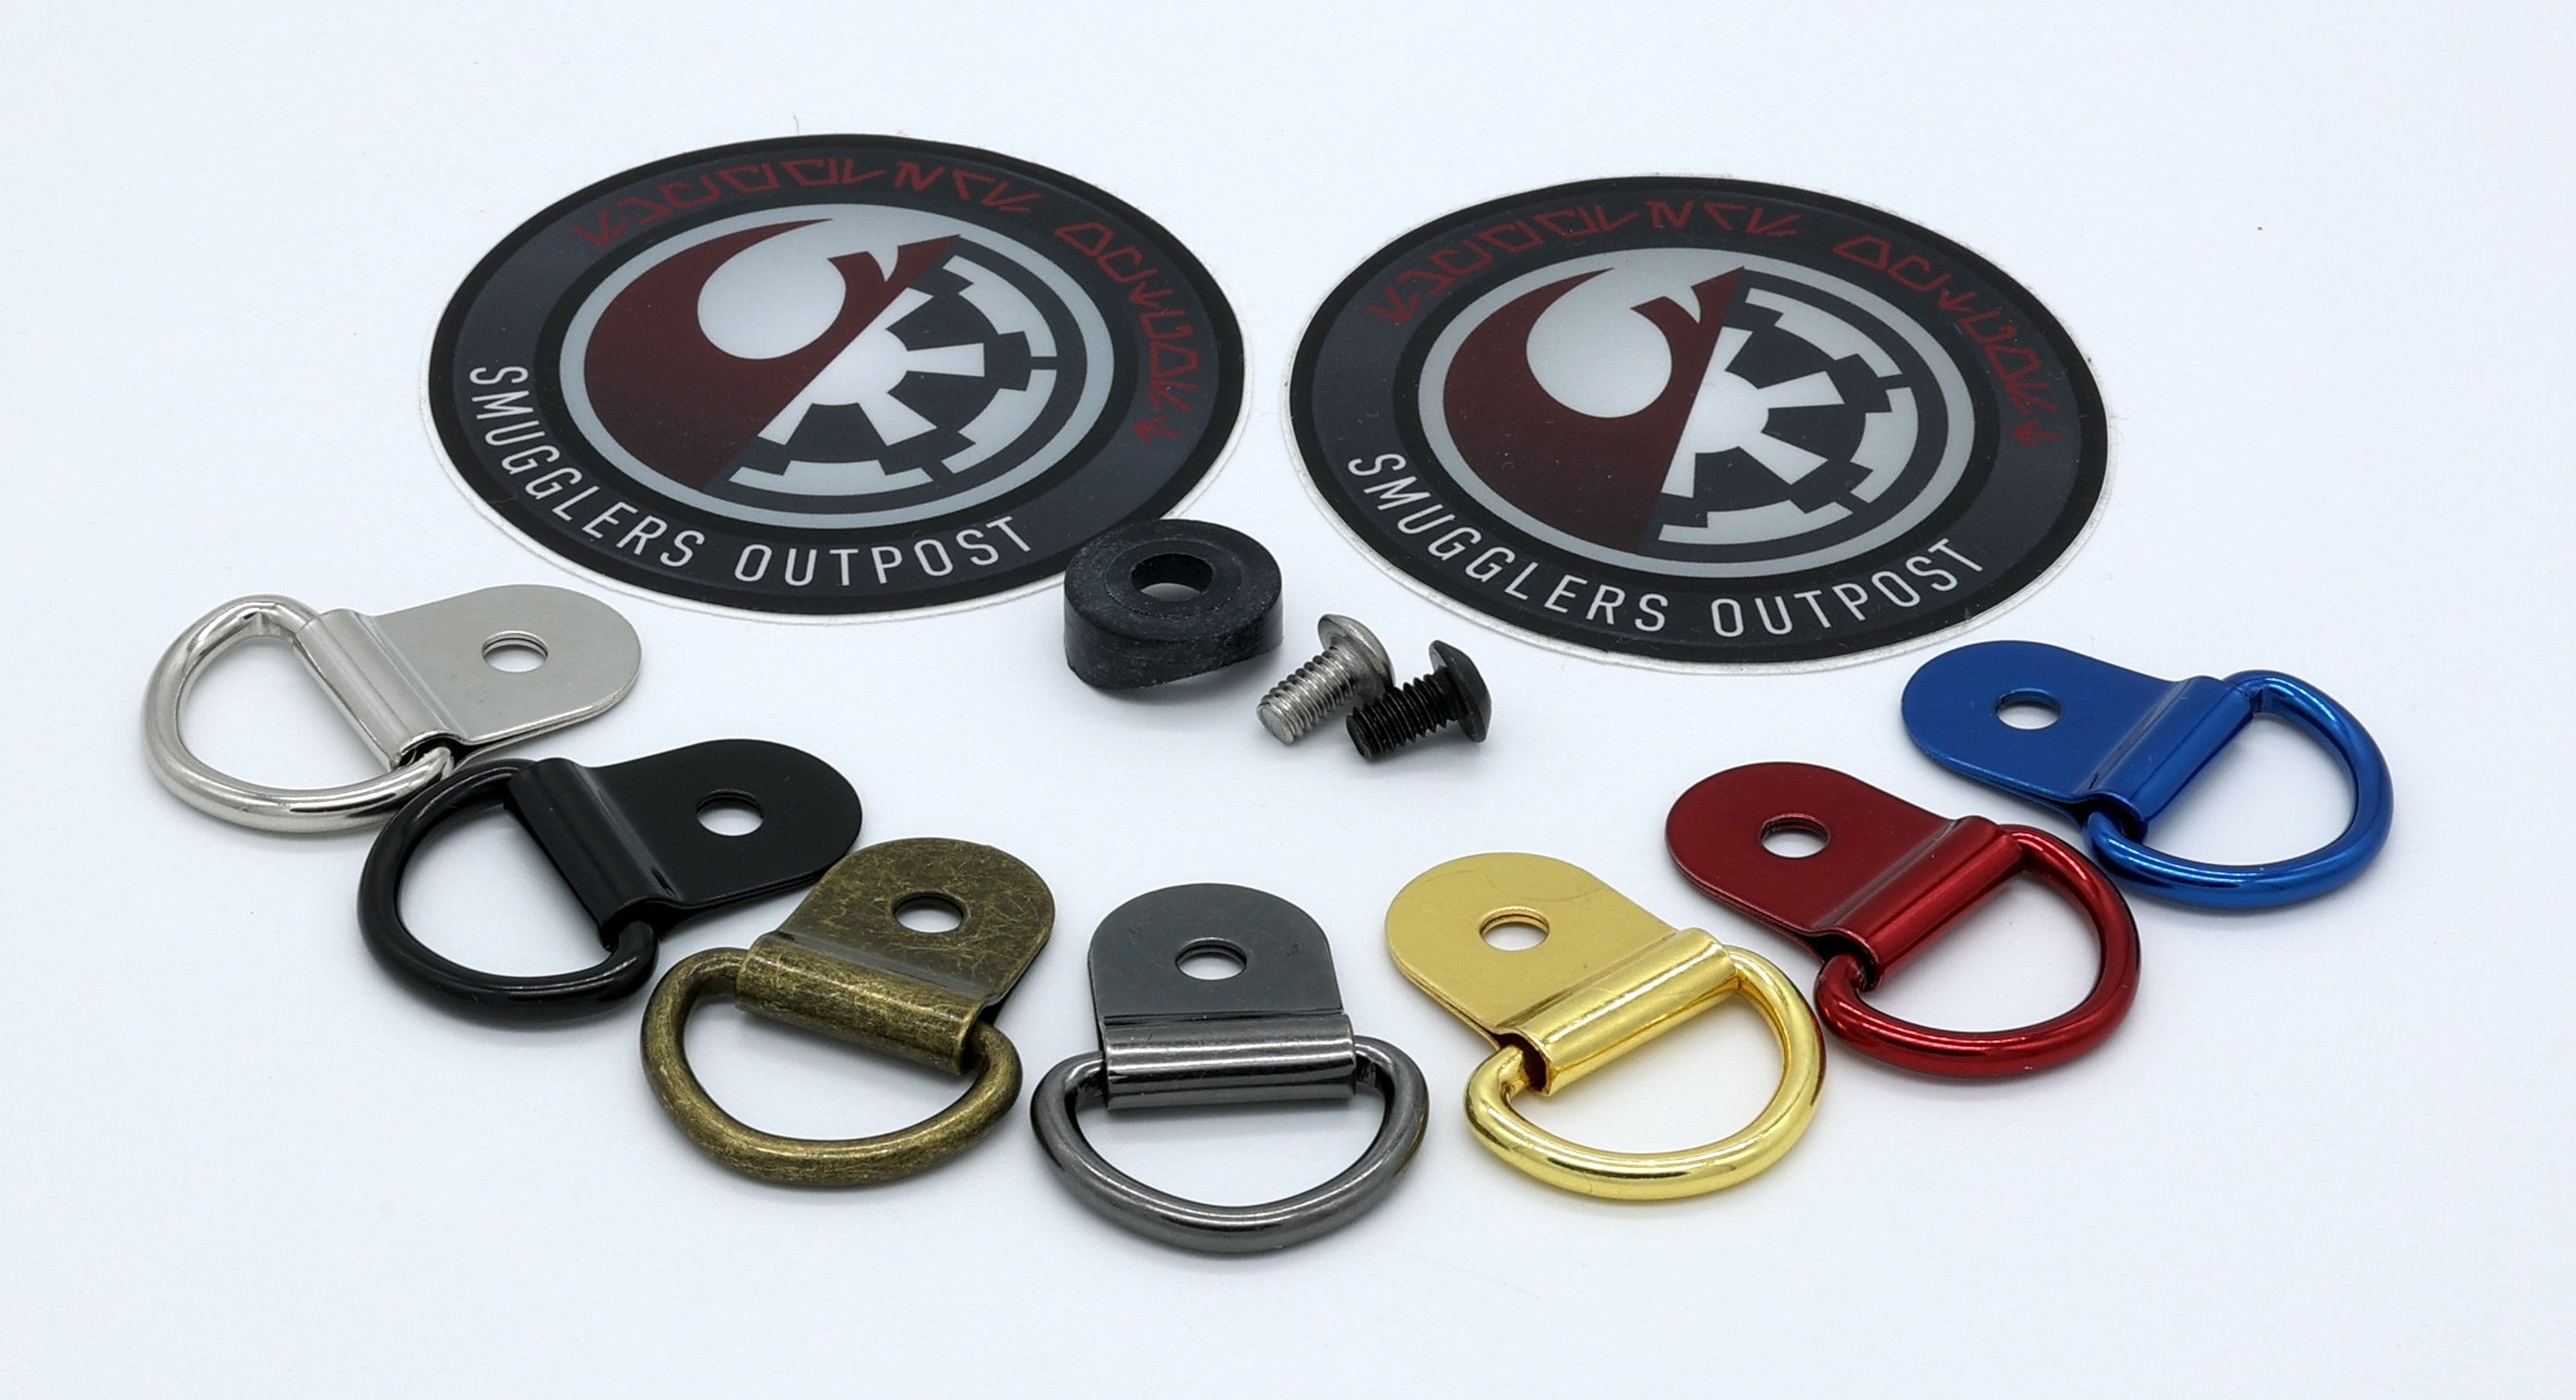 Covertec Wheel D-ring Adapter / Keychain – Vire Sabers